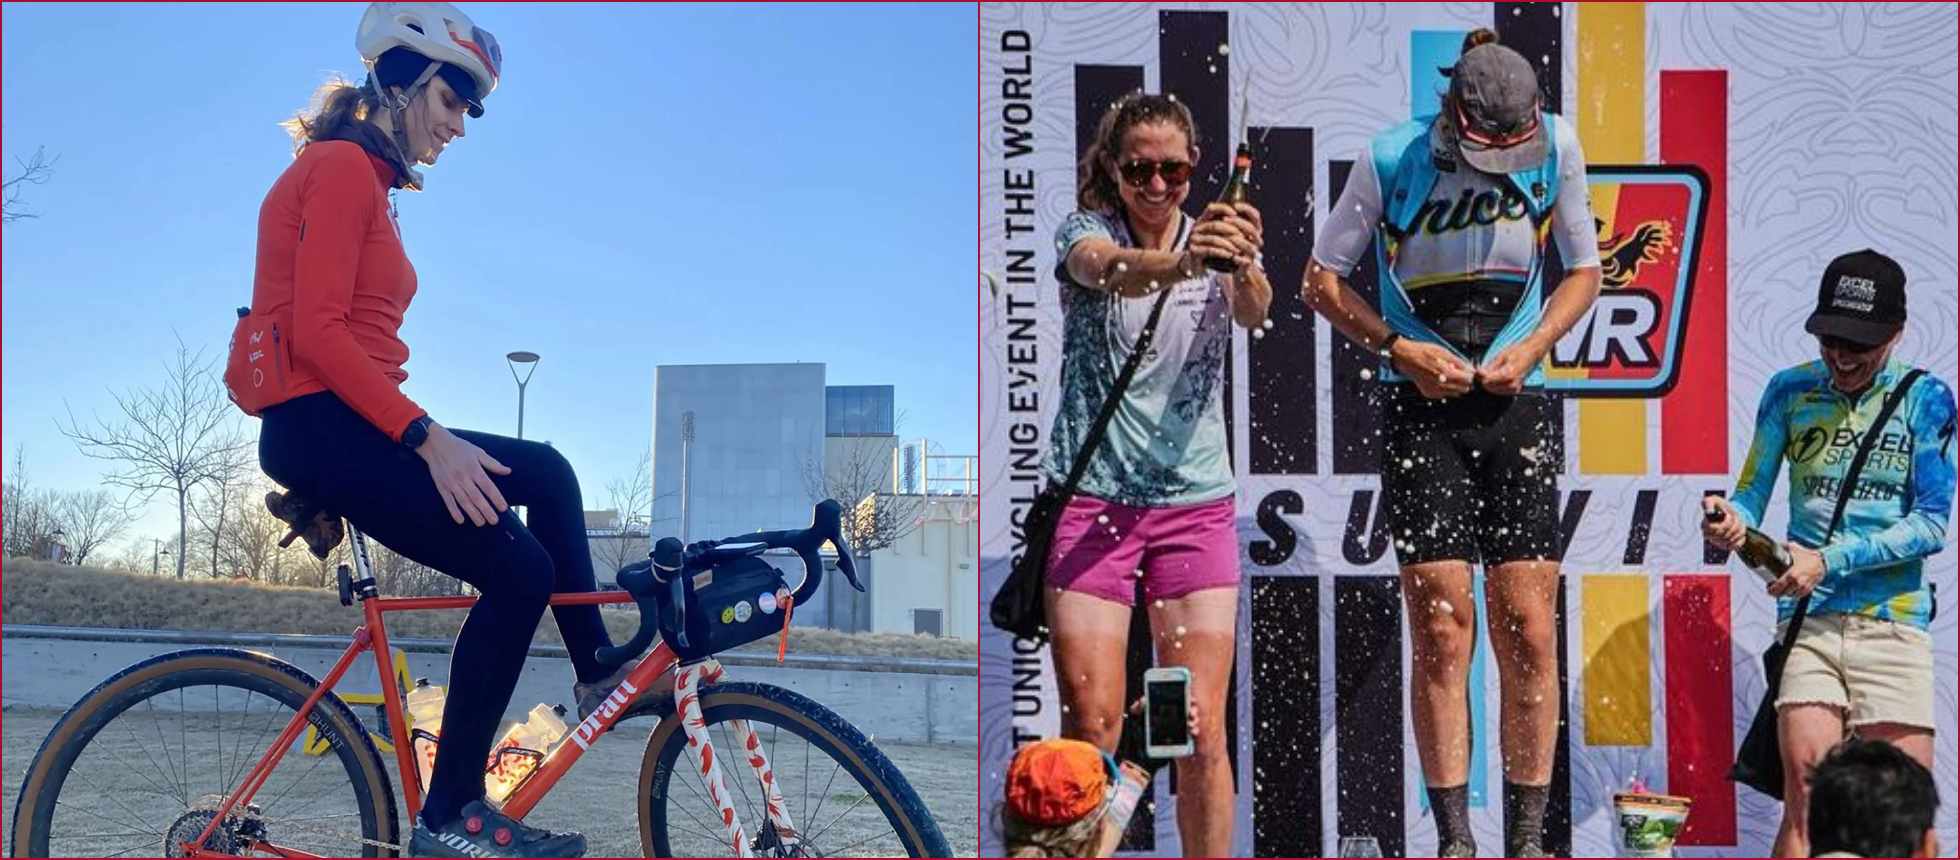 Trans cyclist wins women's division of North Carolina cycling tour ...